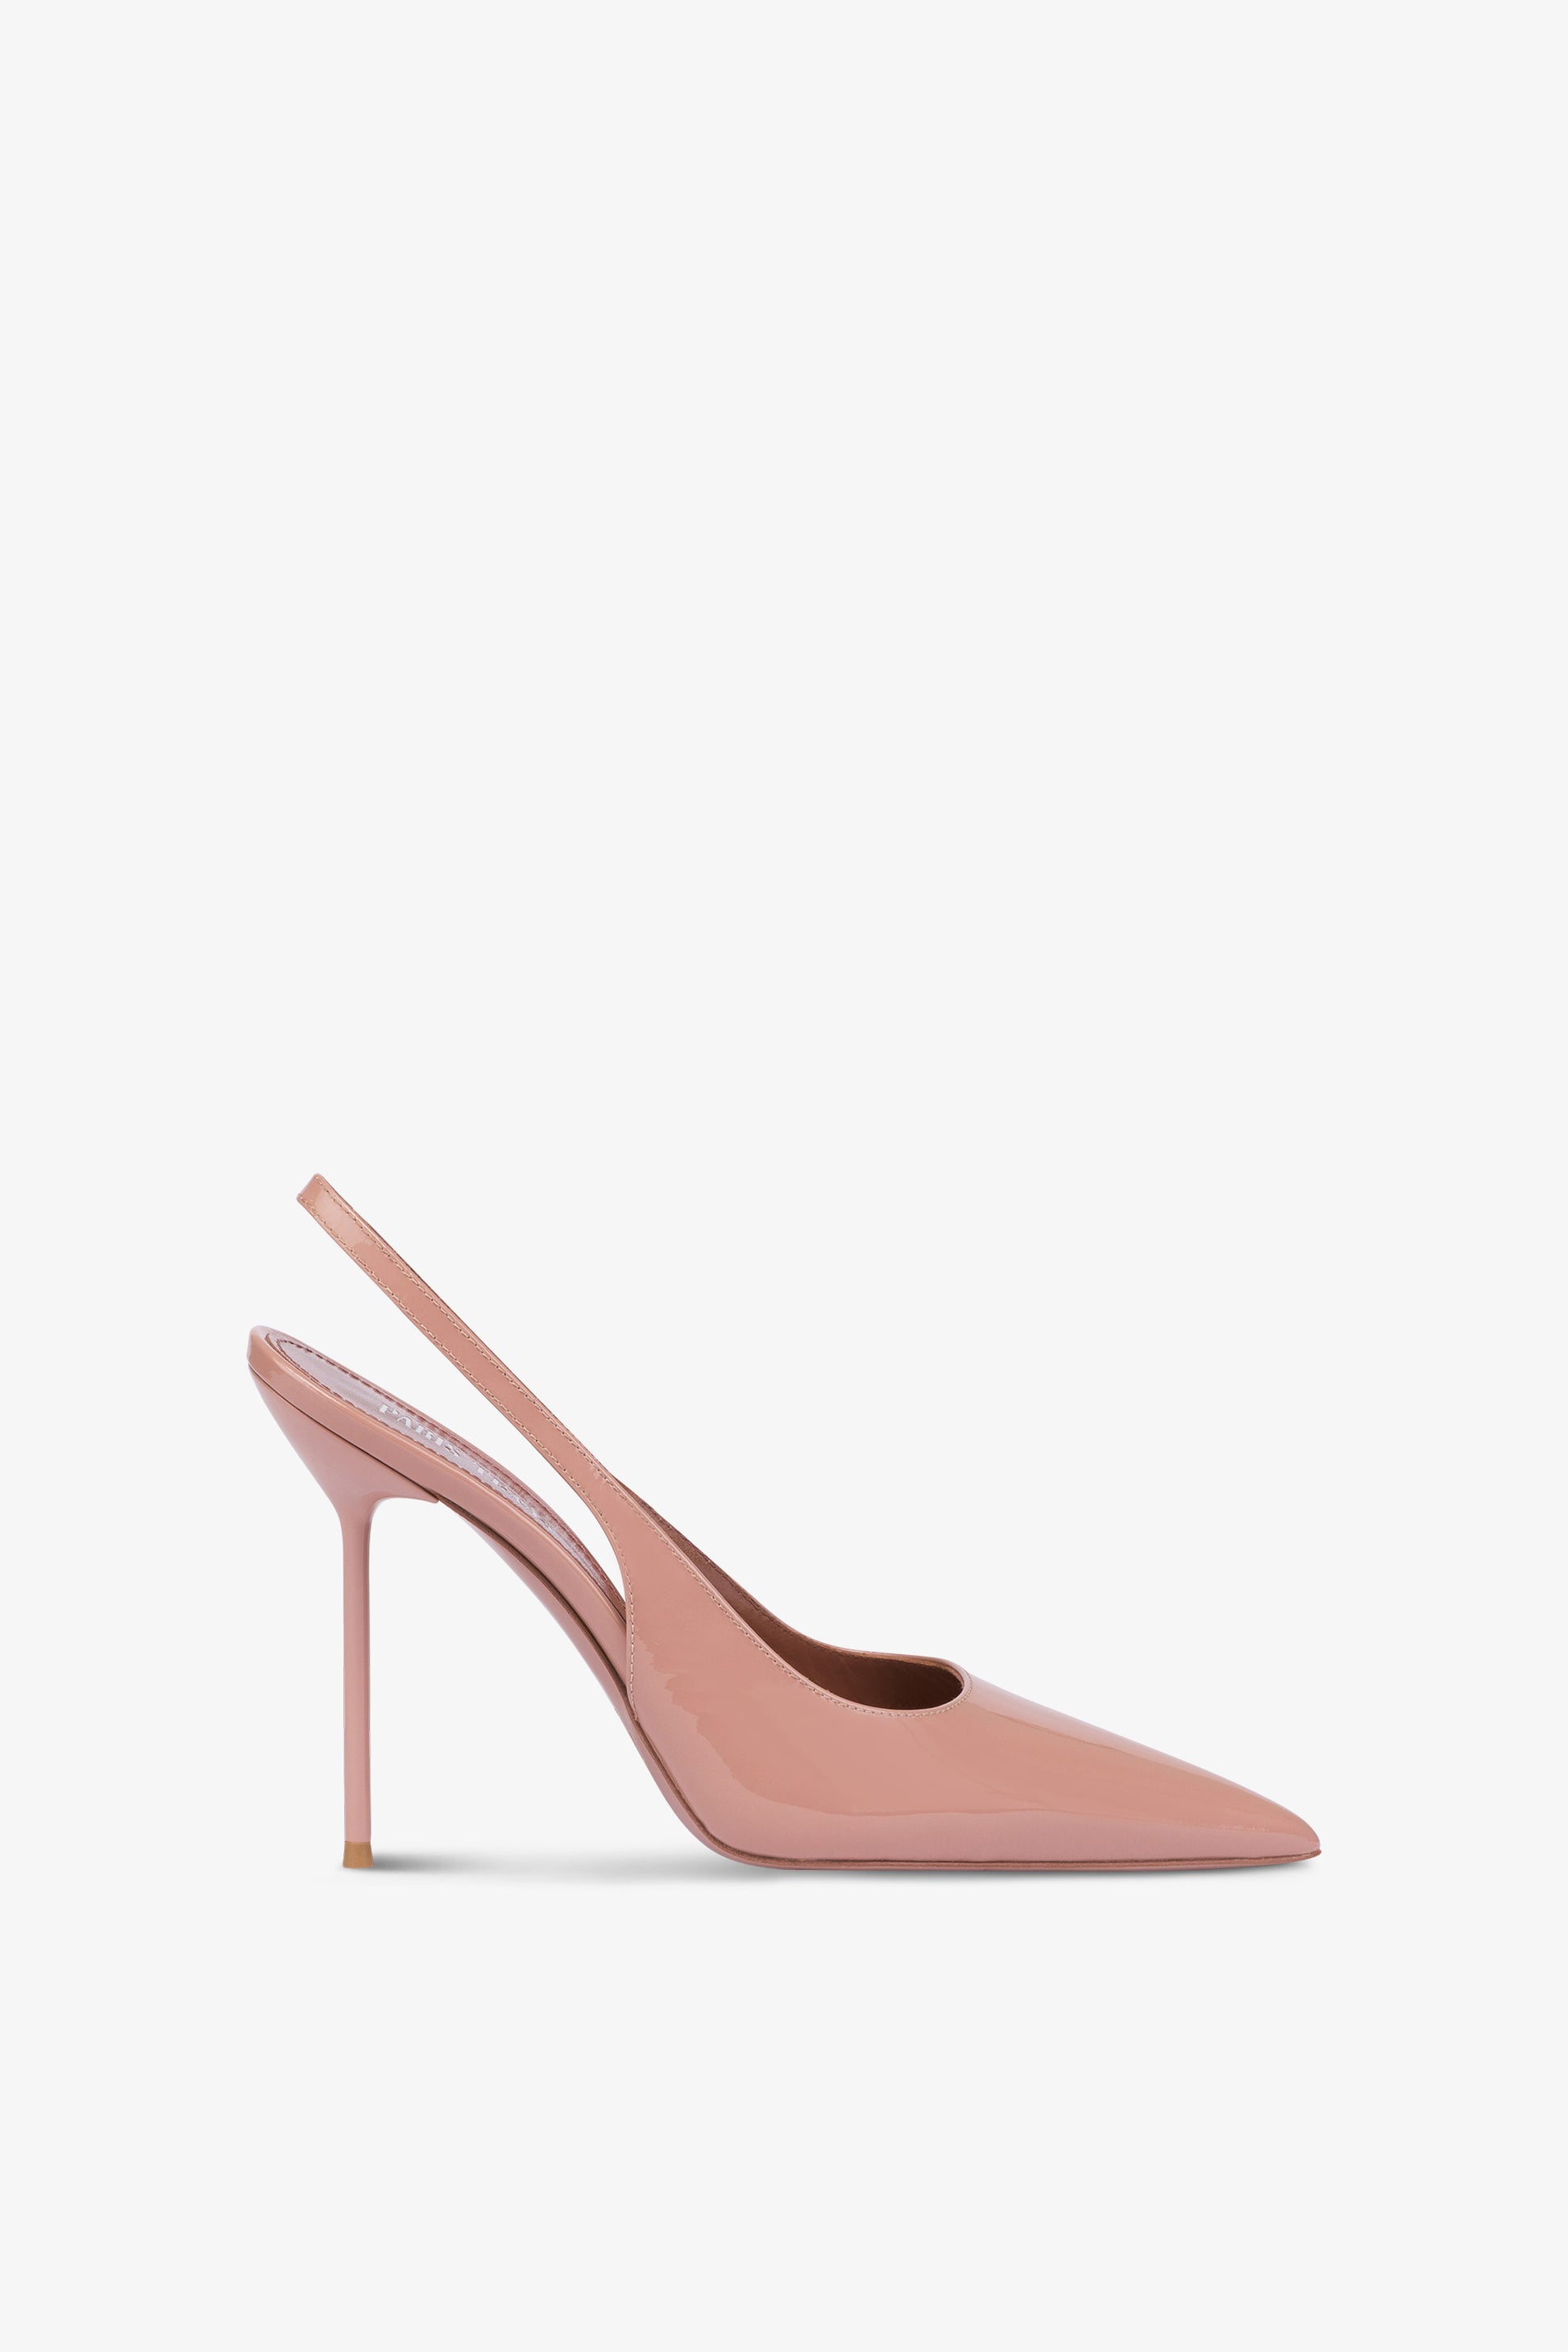 Sharp, pointed slingbacks in patent Texas pink leather